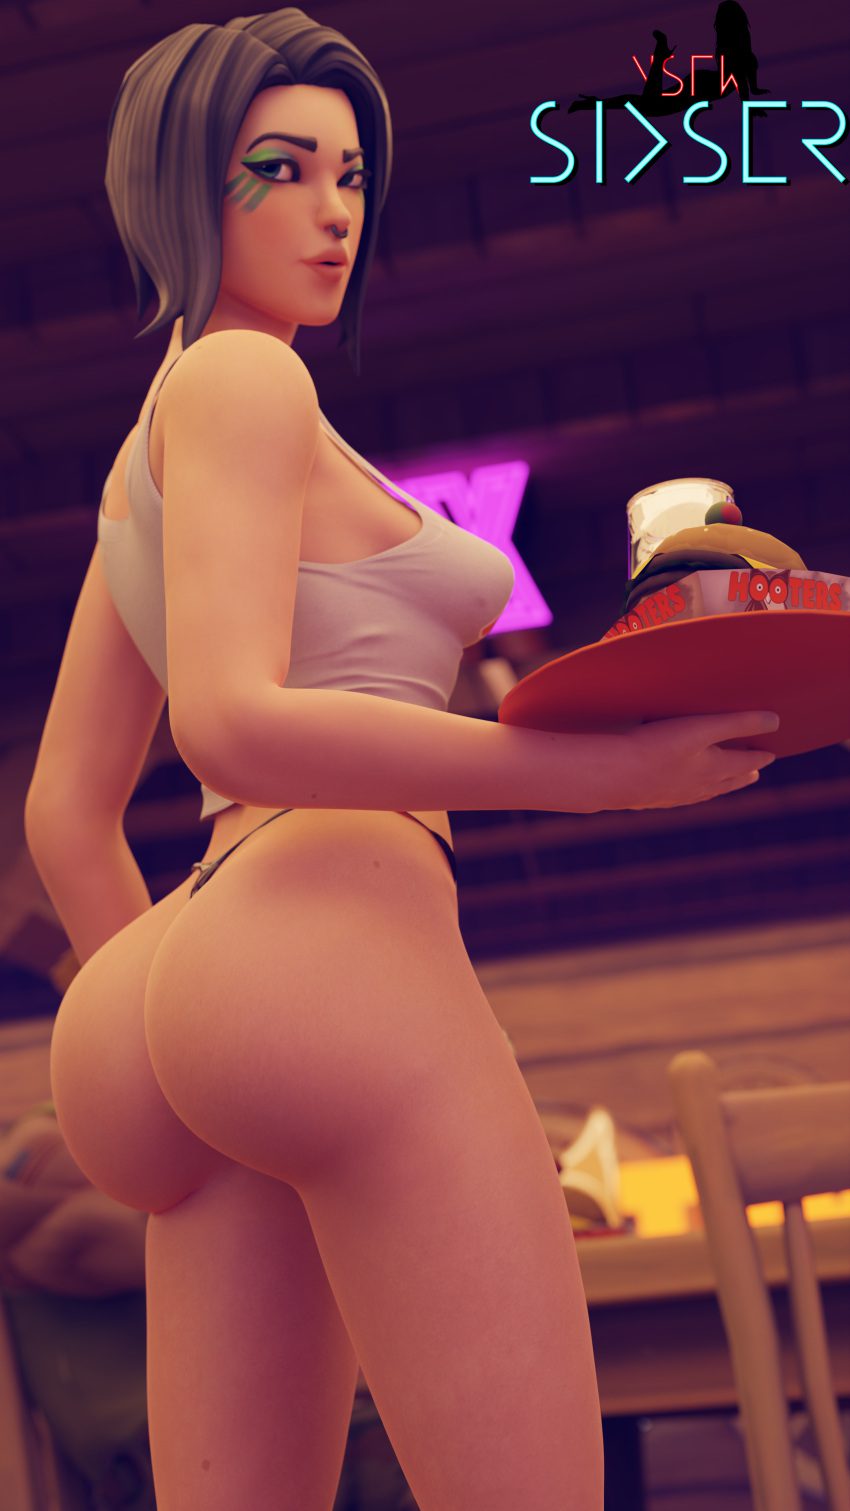 D K Xxx L S - Ark Xxx Art, D&#k Xxx Art - Sixser, Fortnite: Battle Royale, Hooters -  Valorant Porn Gallery